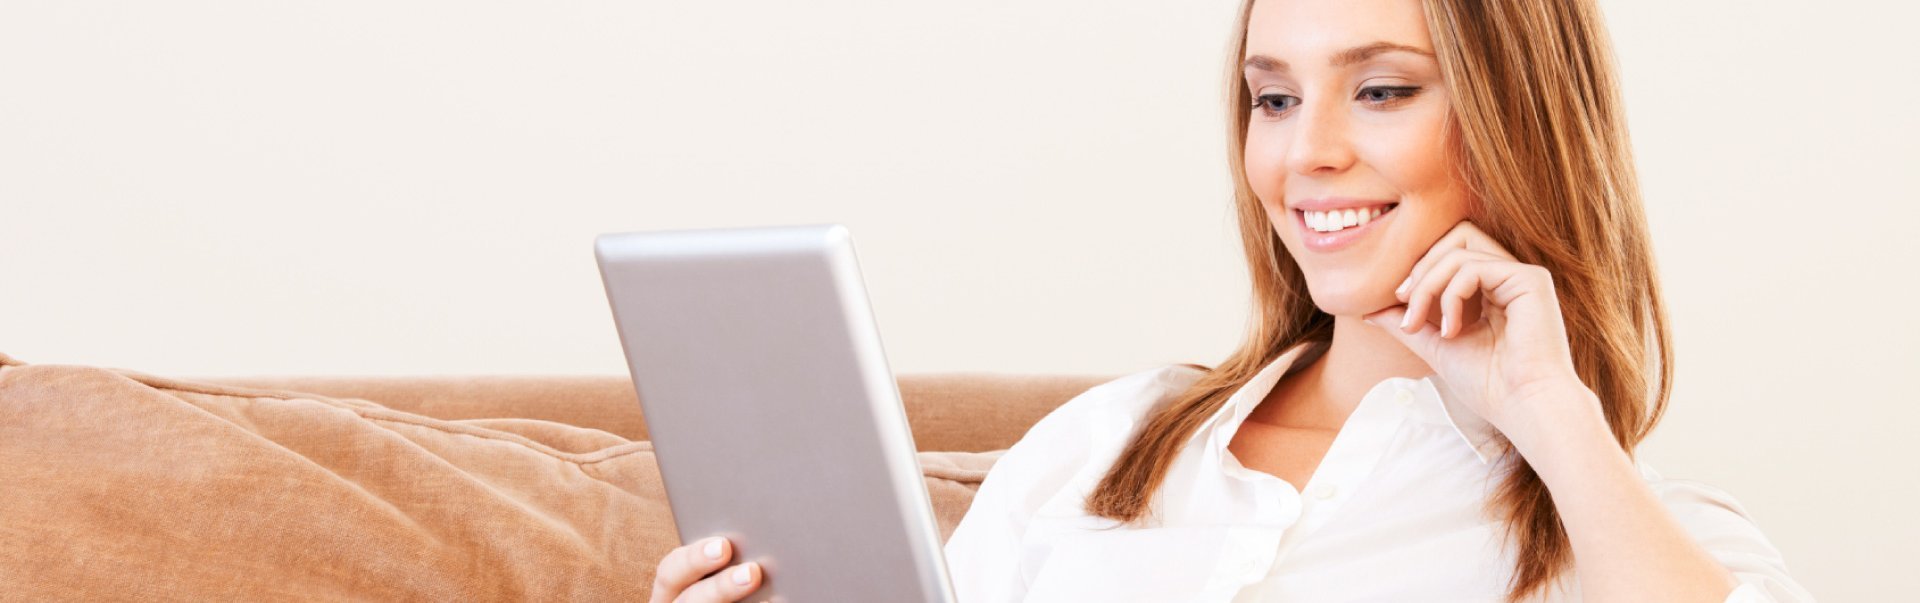 woman holding tablet while sitting on couch